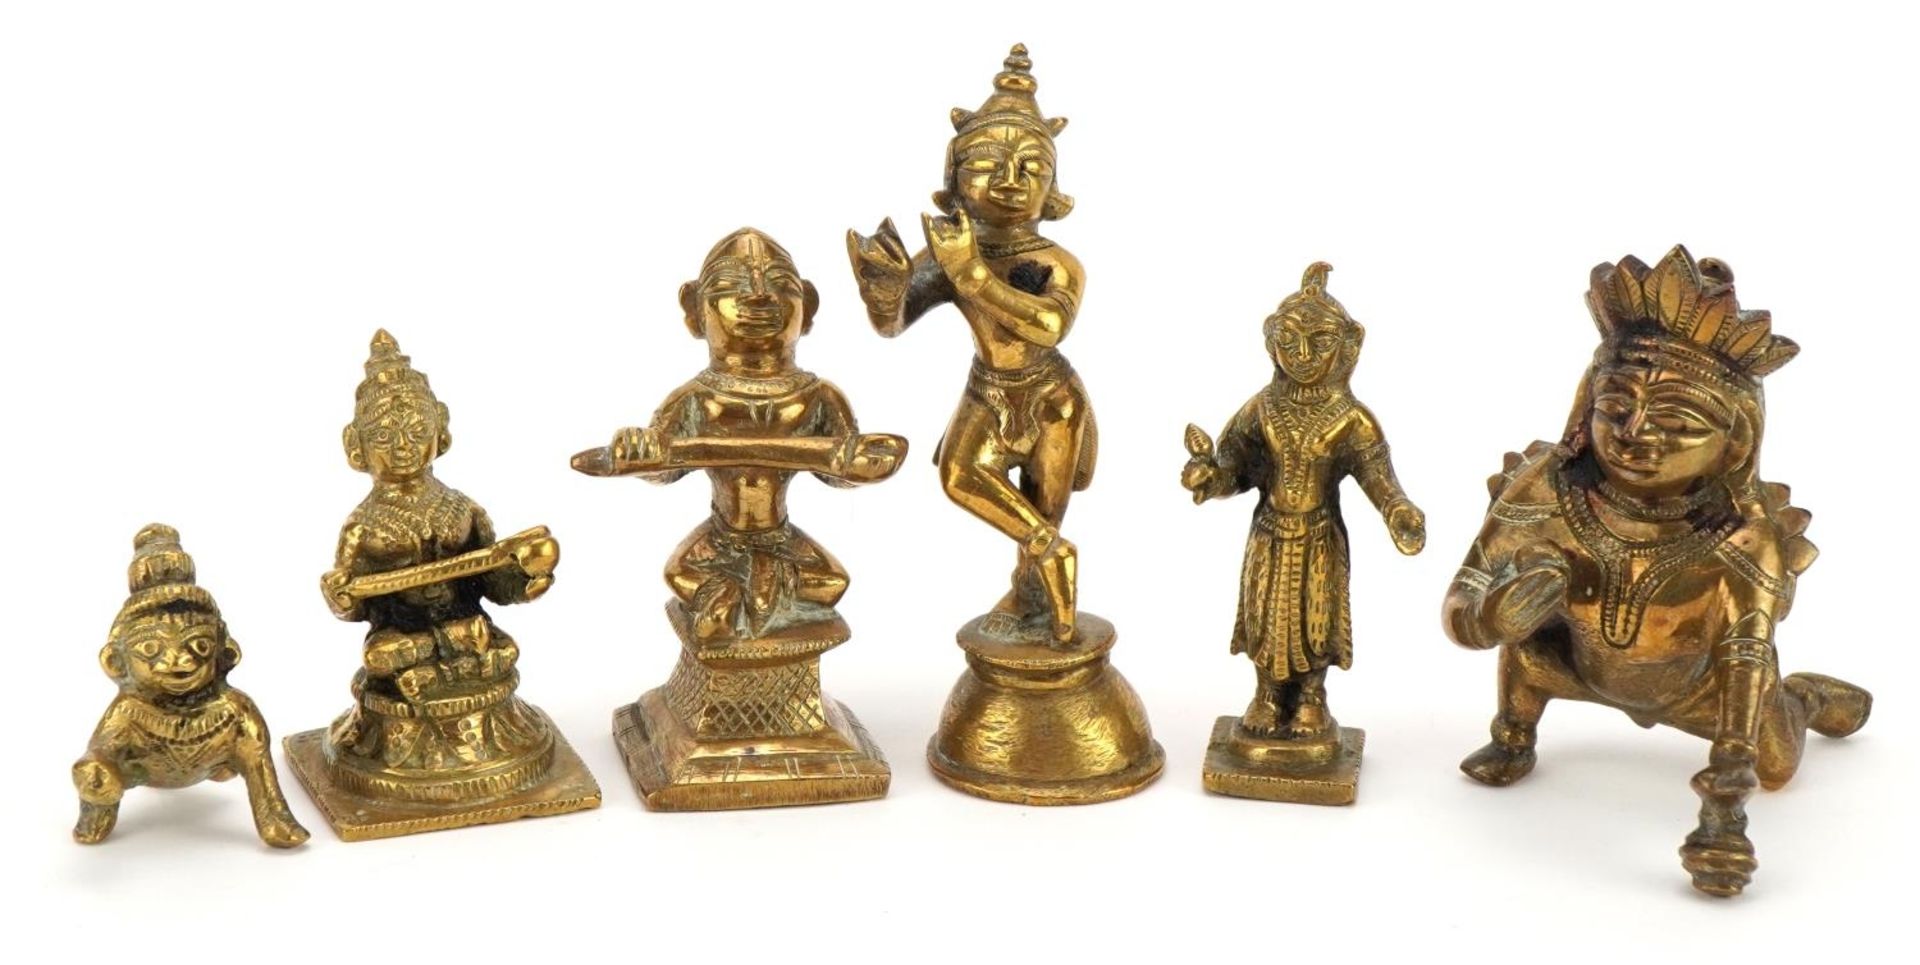 Six Indian bronze figures of Buddha and deities, the largest 9.5cm high